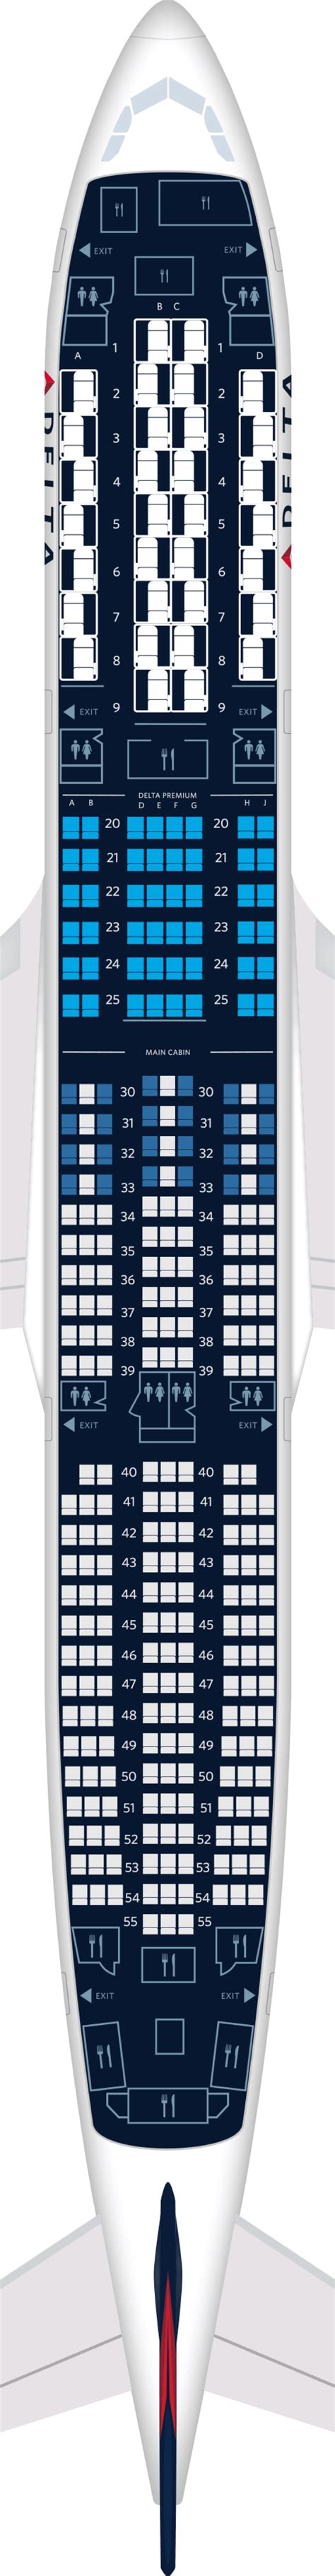 For your next SAS flight, use this seating chart to get the most 